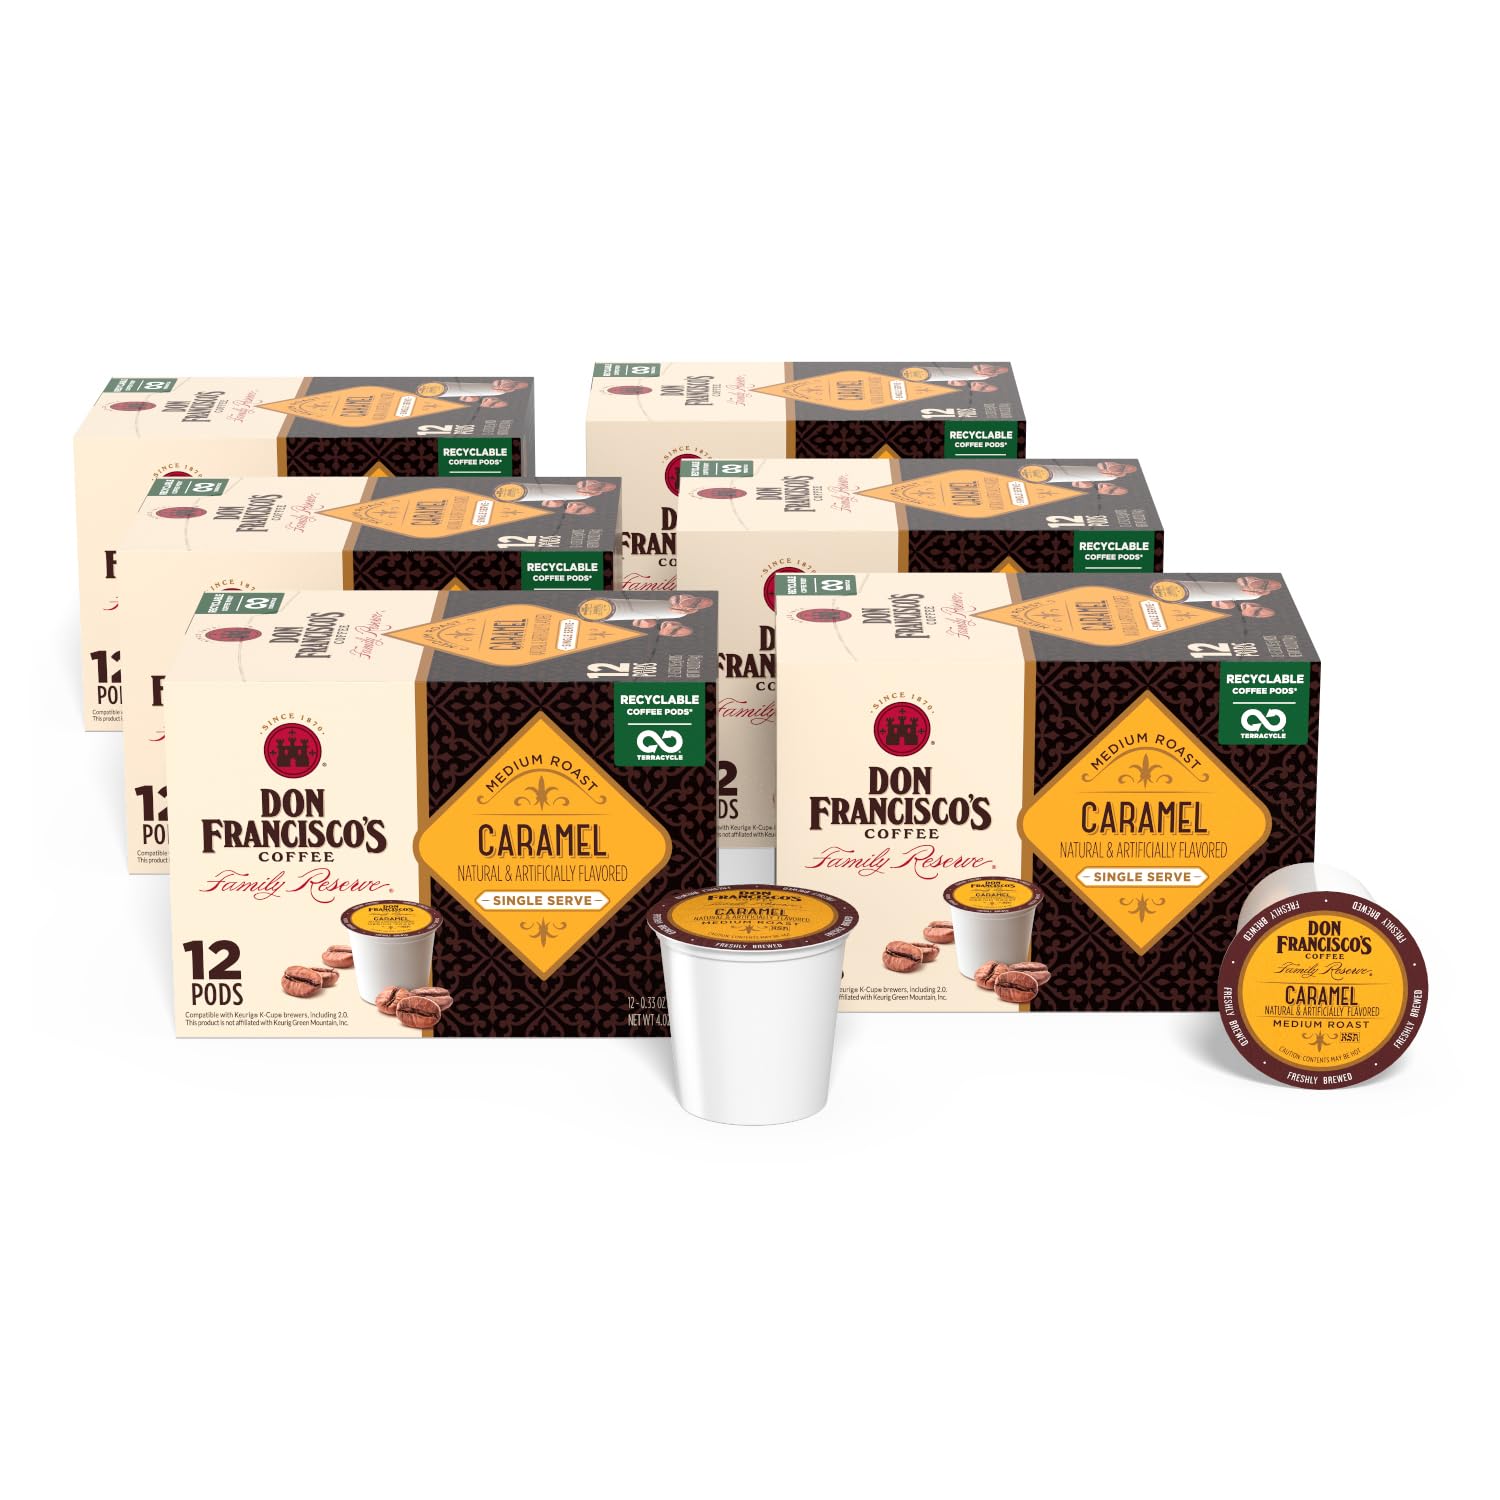 Don Francisco's Caramel Flavored Medium Roast Coffee Pods - 72 Count- Recyclable Single-Serve Coffee Pods, Compatible with your K- Cup Keurig Coffee Maker